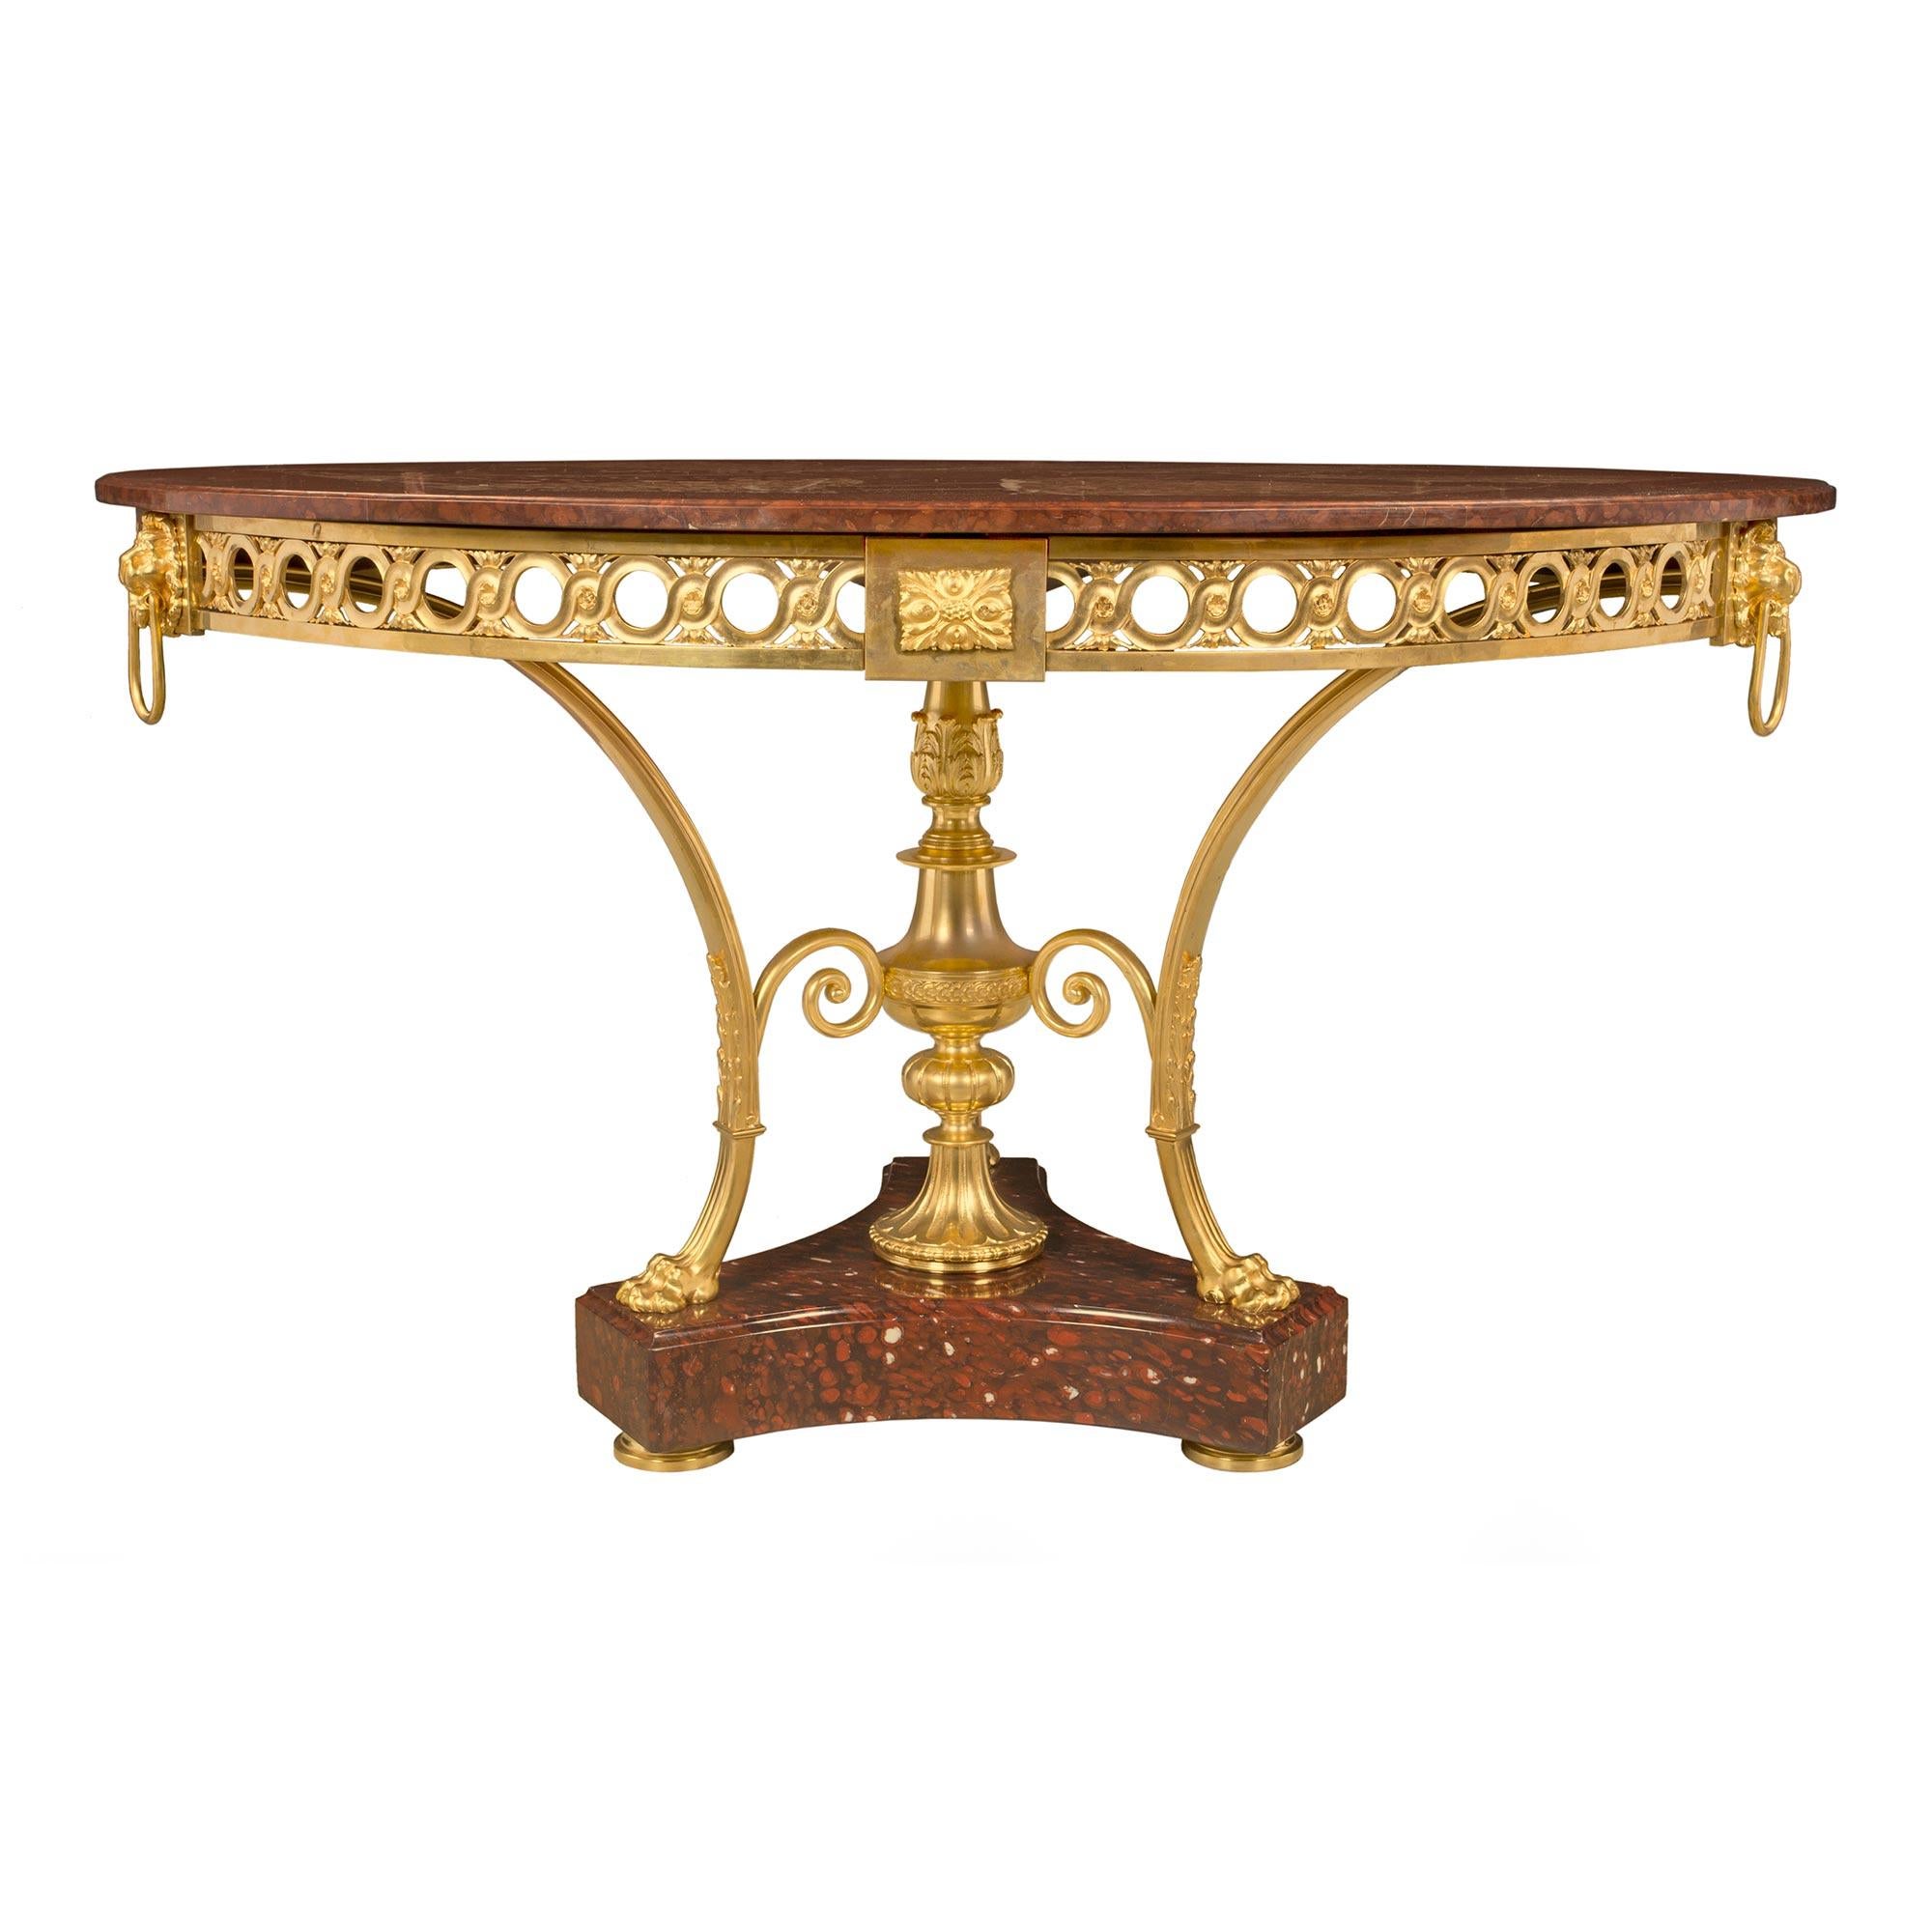 French 19th Century Neoclassical Style Ormolu and Griotte Marble Center Table In Good Condition For Sale In West Palm Beach, FL